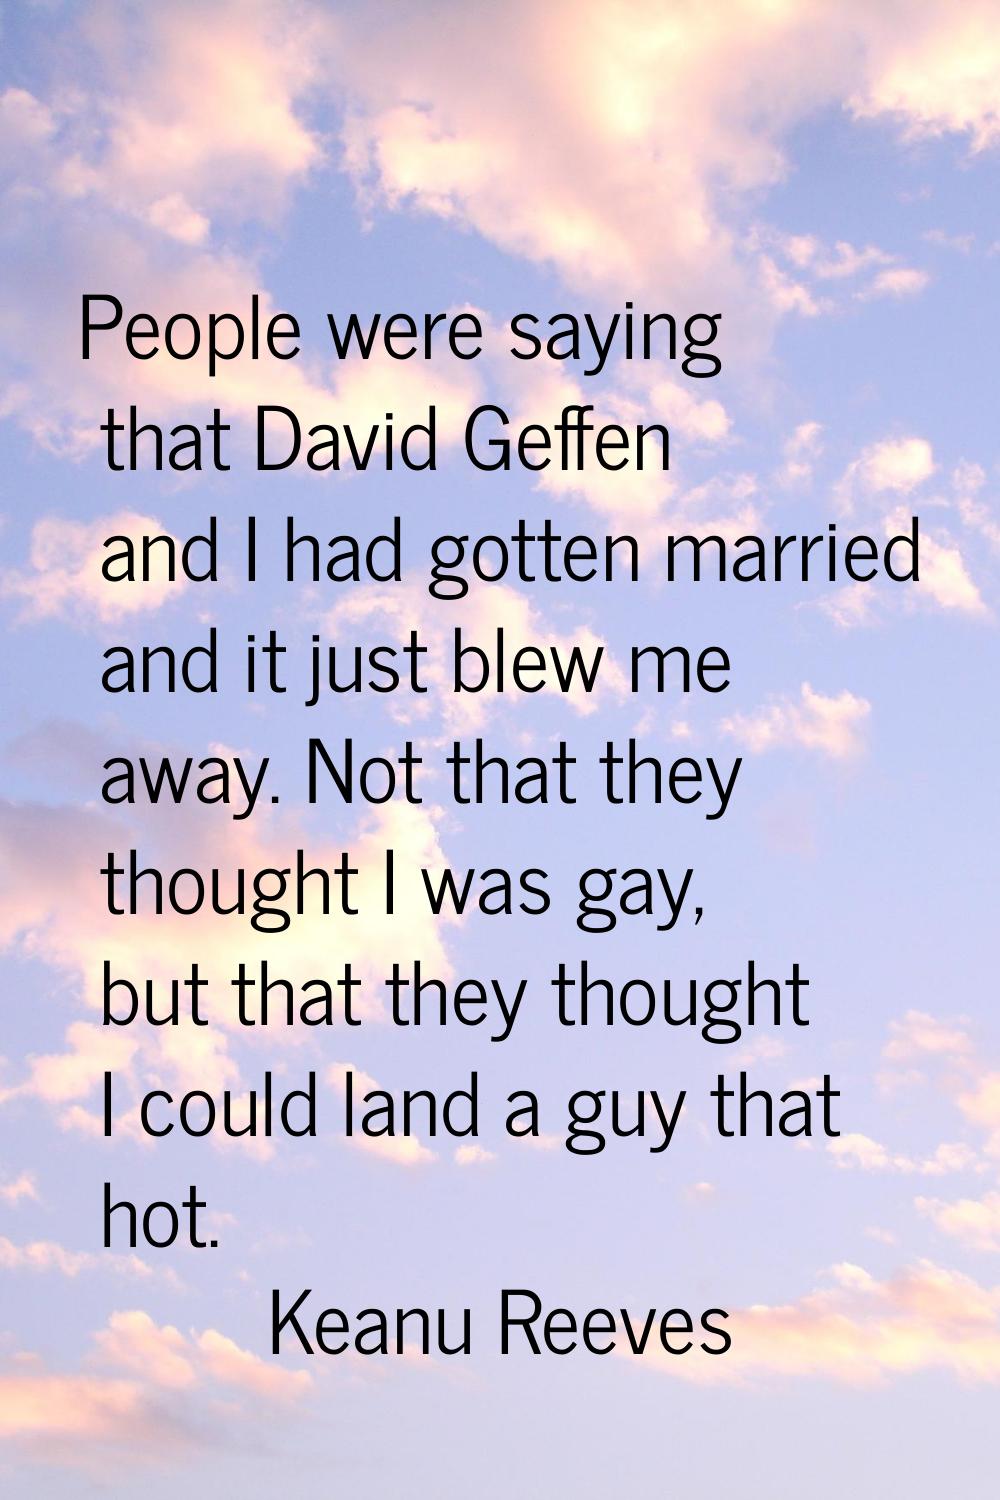 People were saying that David Geffen and I had gotten married and it just blew me away. Not that th